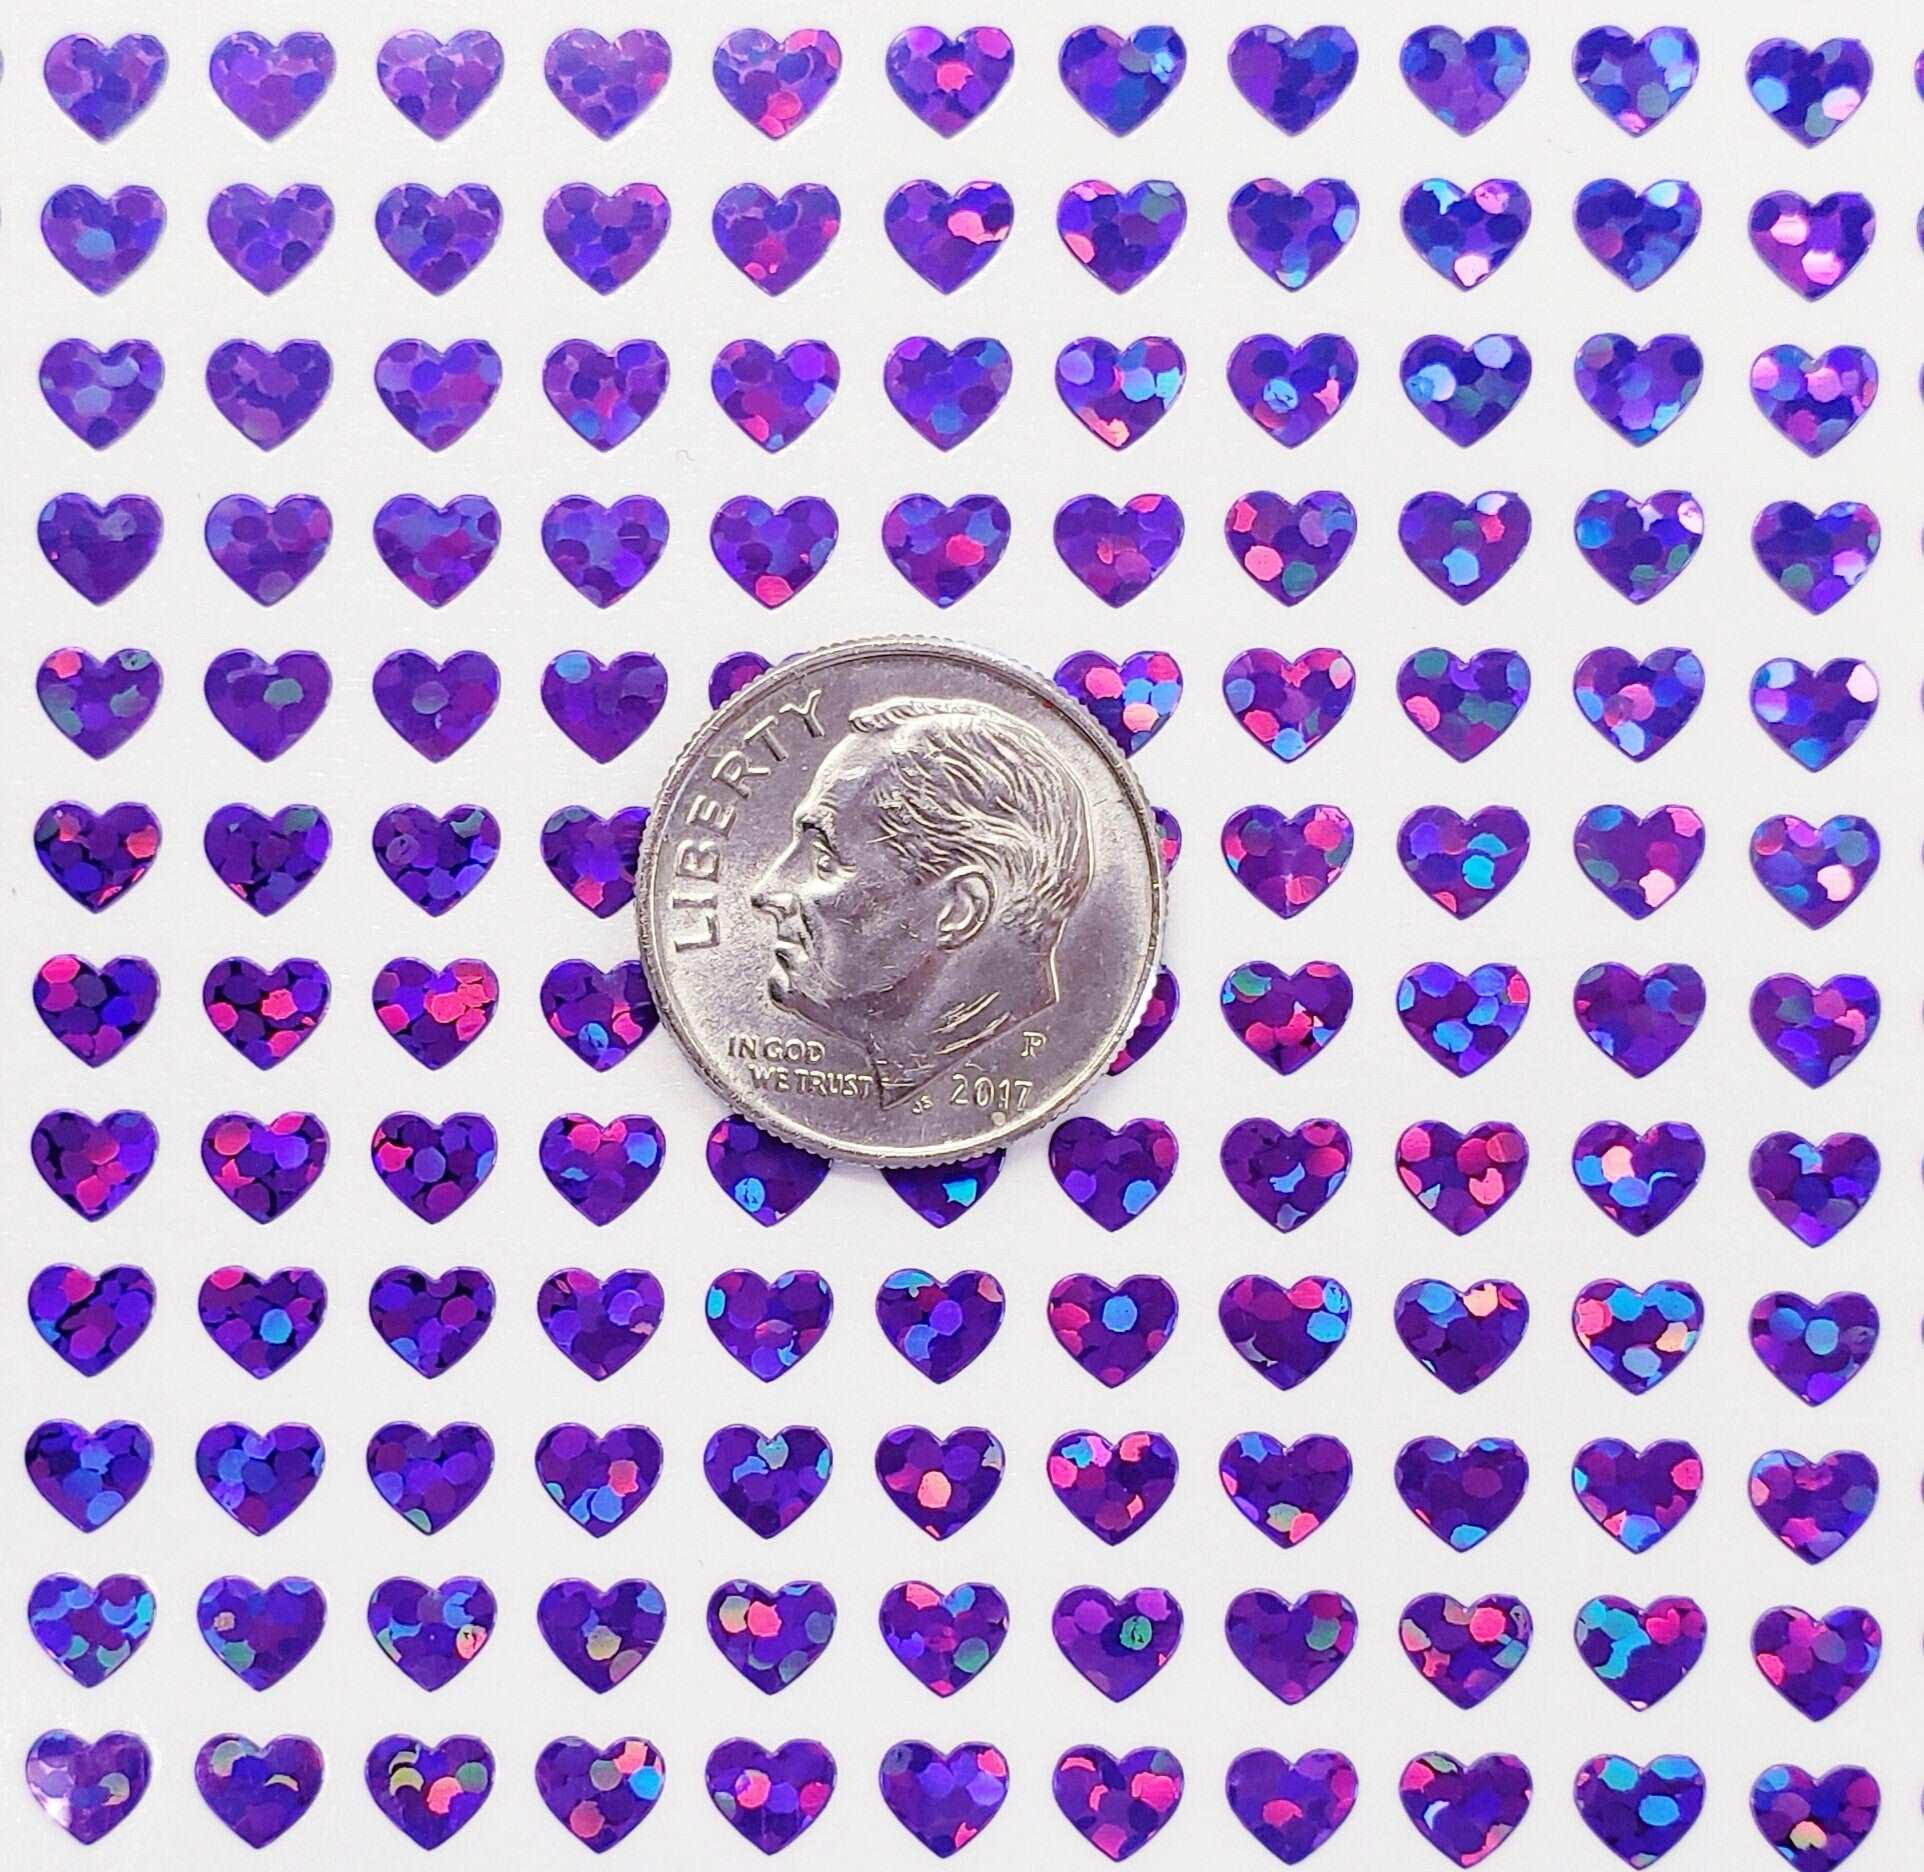 Heart Stickers, set of 640 extra small purple glitter heart stickers for bullet journals, notebooks, toploader card sleeves and planners.